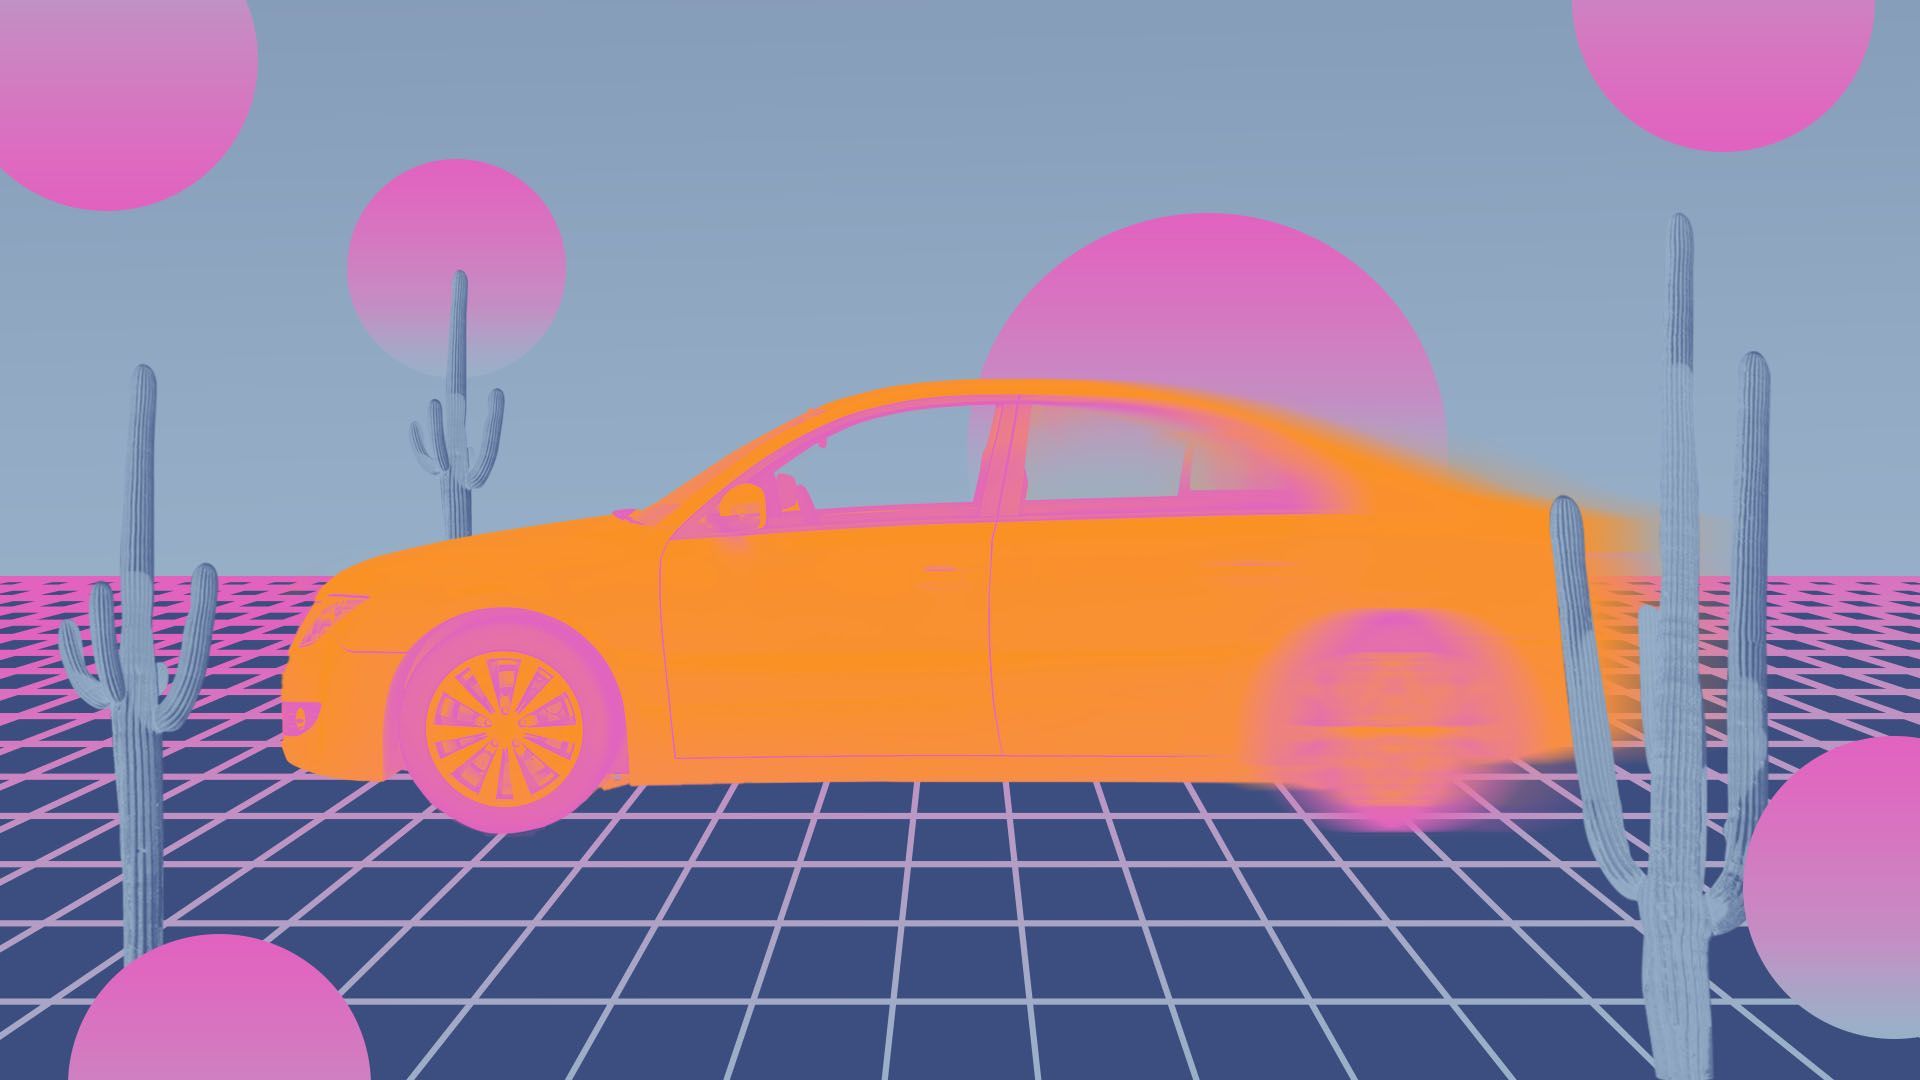 illustration of an orange moving car with no driver in front of cacti, wireframes and neon pink circles 